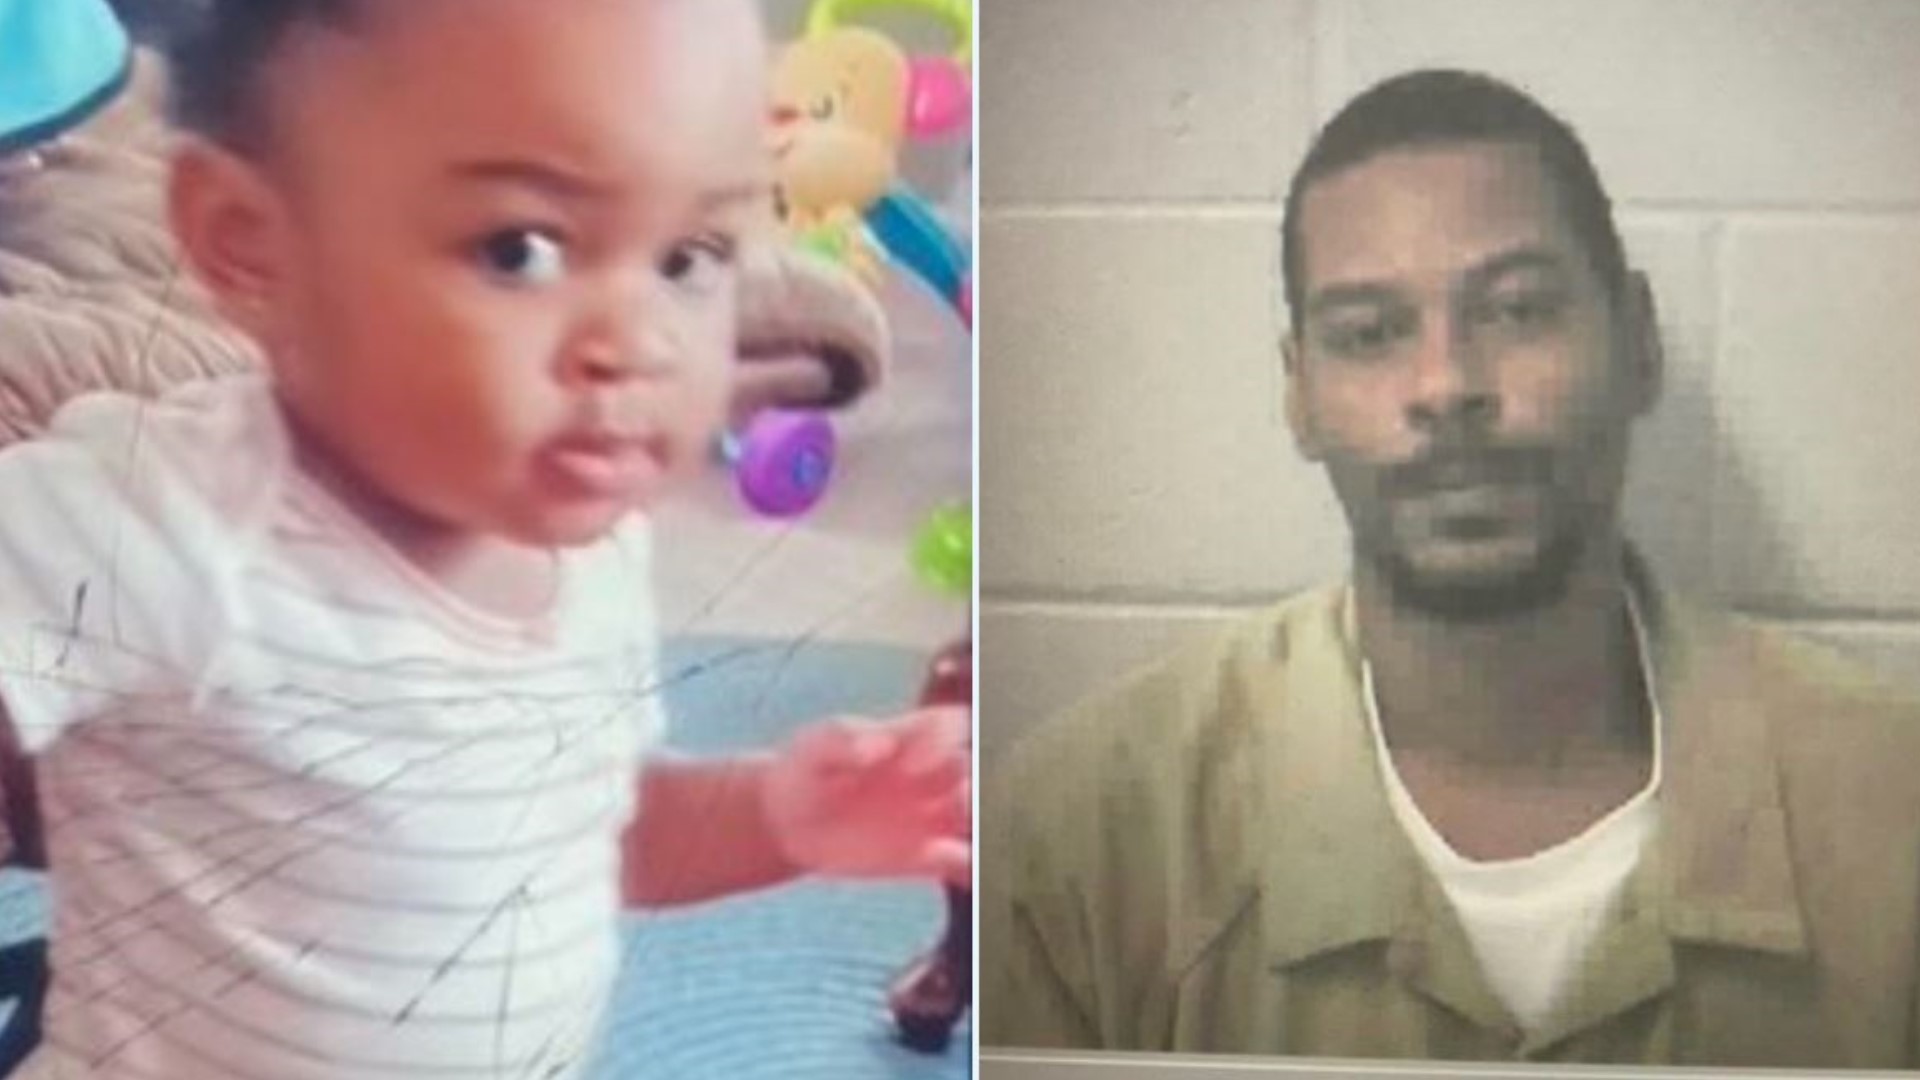 He also shot the baby's grandmother multiple times, a sergeant with the Newton County sheriff's office said.